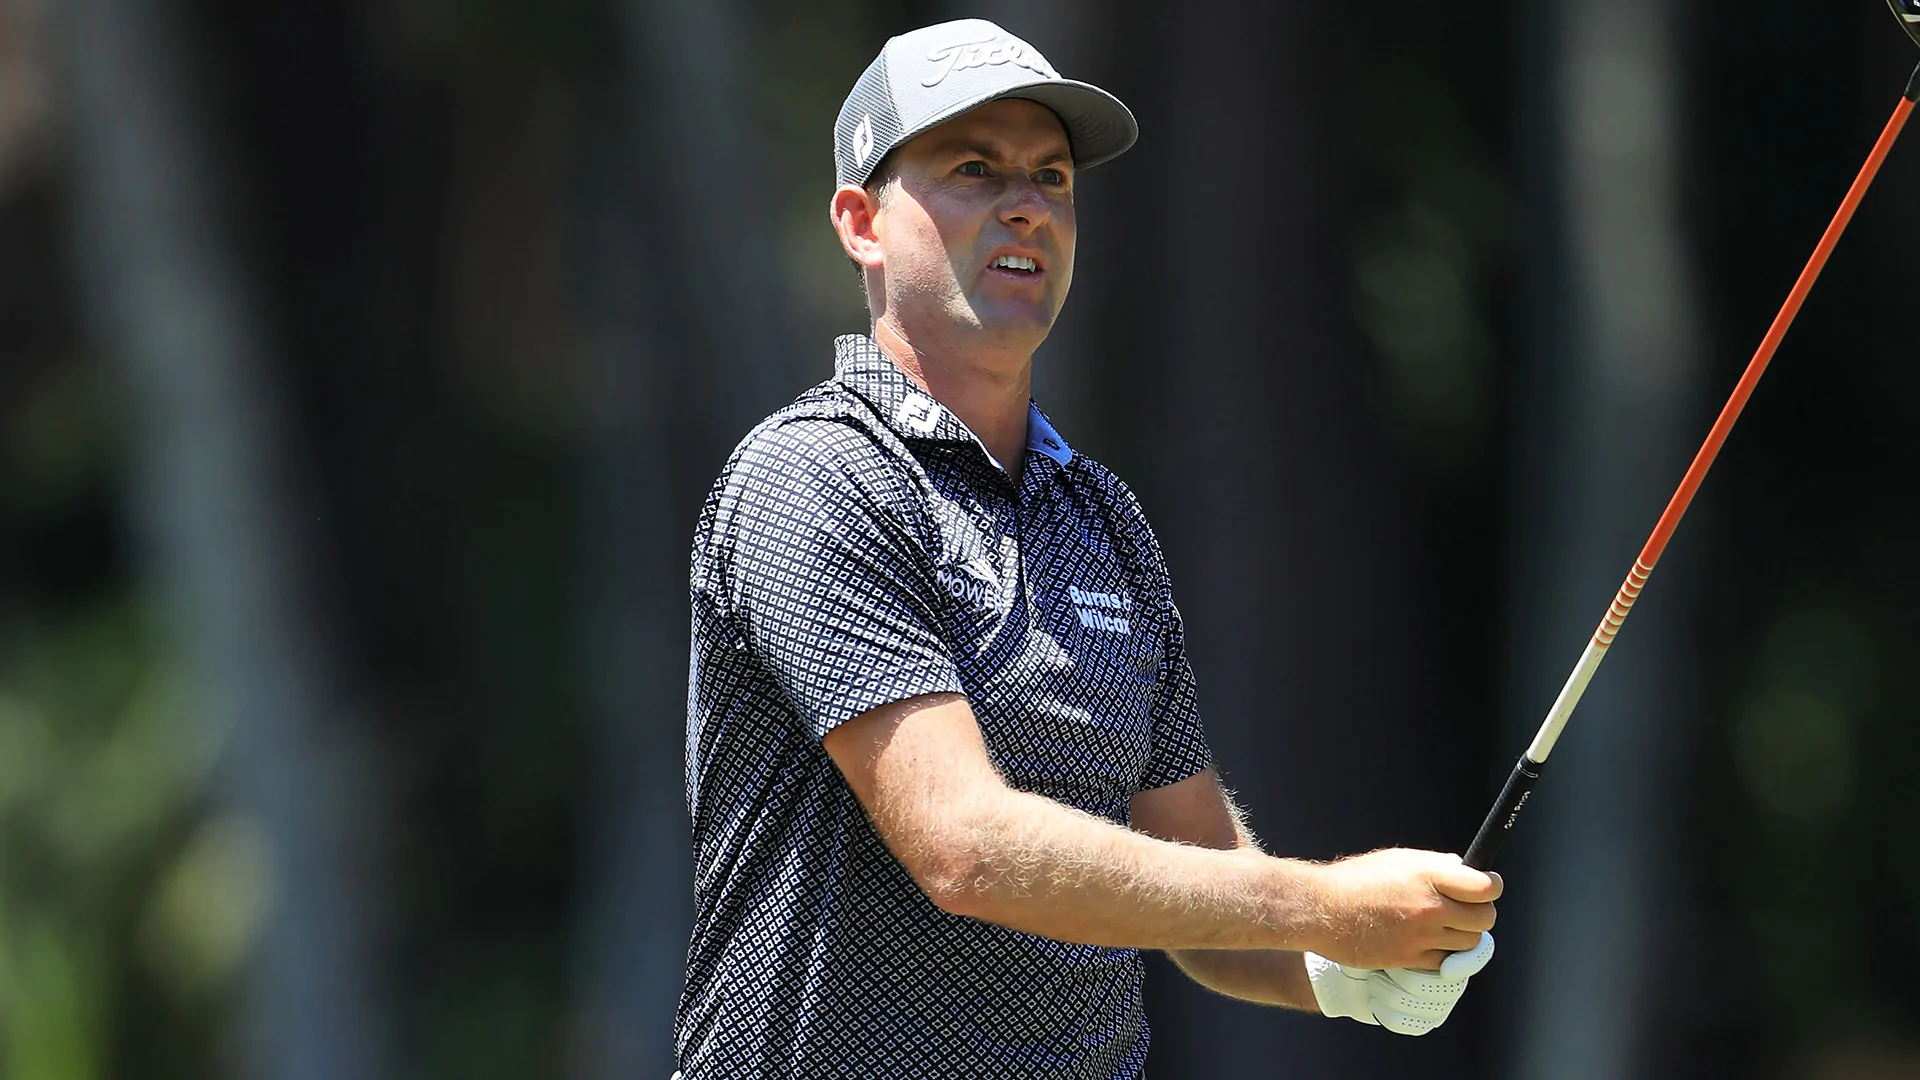 Webb Simpson shares lead with three others after 54 holes at RBC Heritage